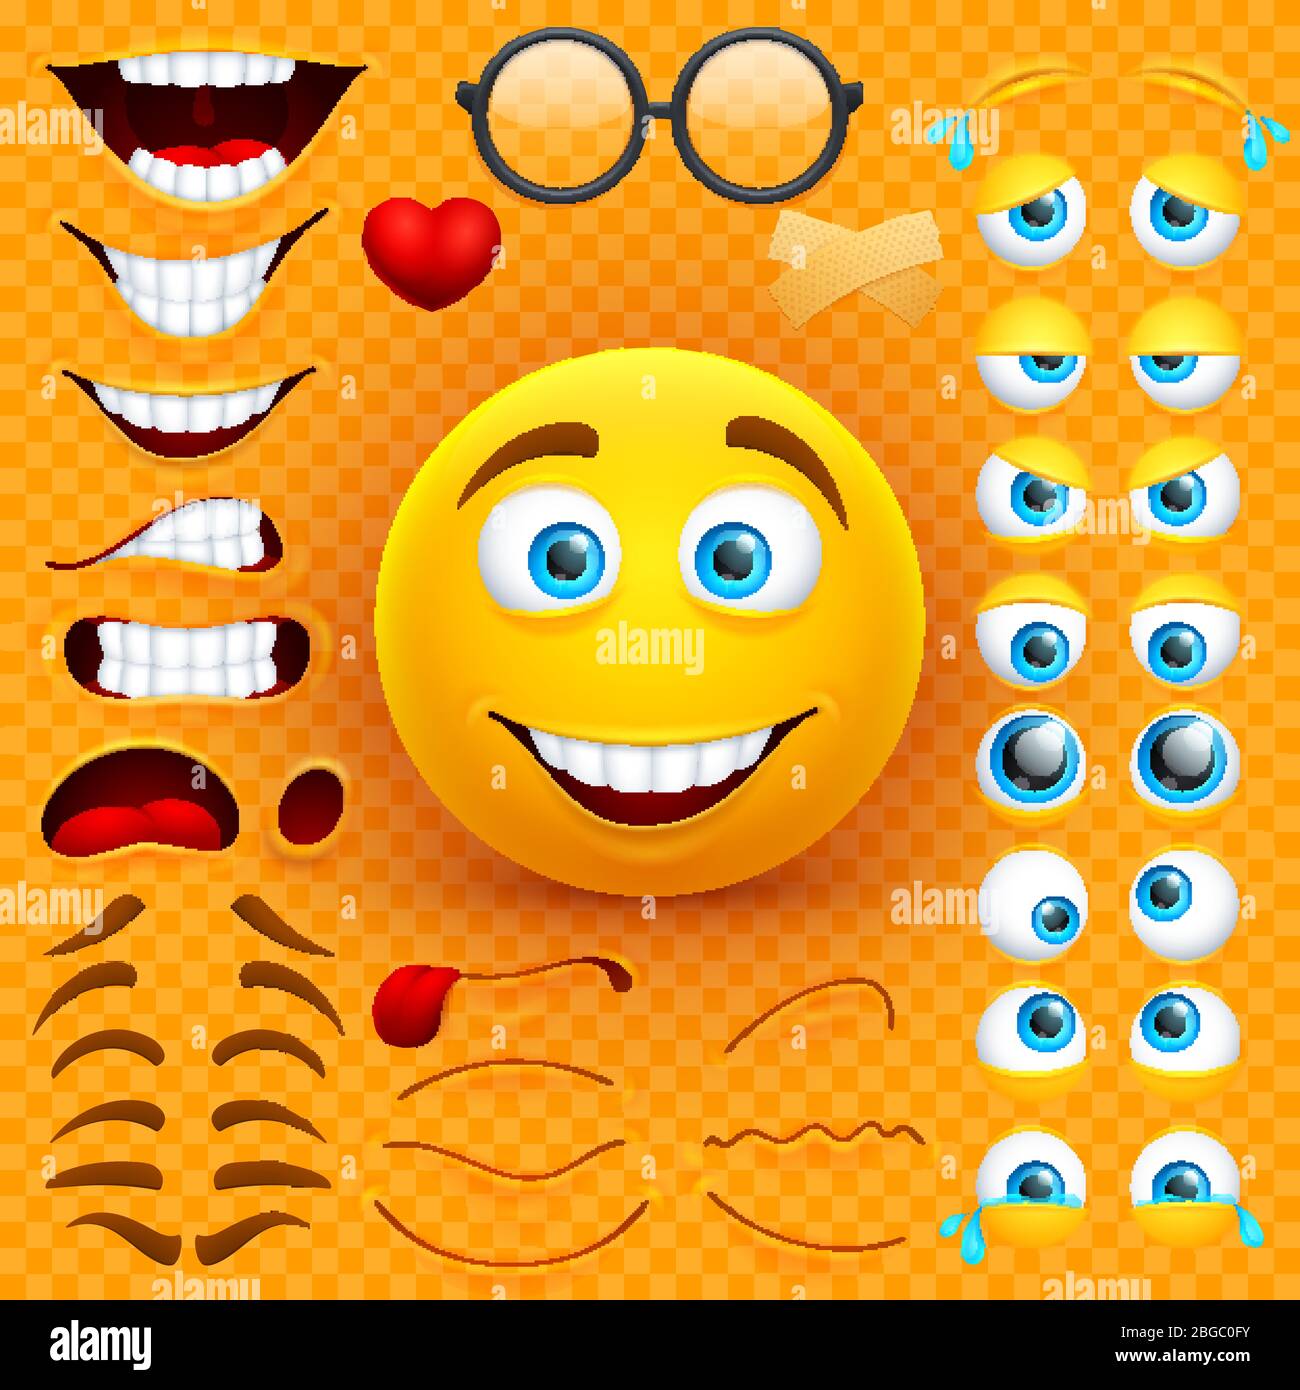 Cartoon yellow 3d smiley face vector character creation constructor. Emoji with emotions, eyes and mouthes set. Illustration of emoticon face smiley, creation smile mood Stock Vector